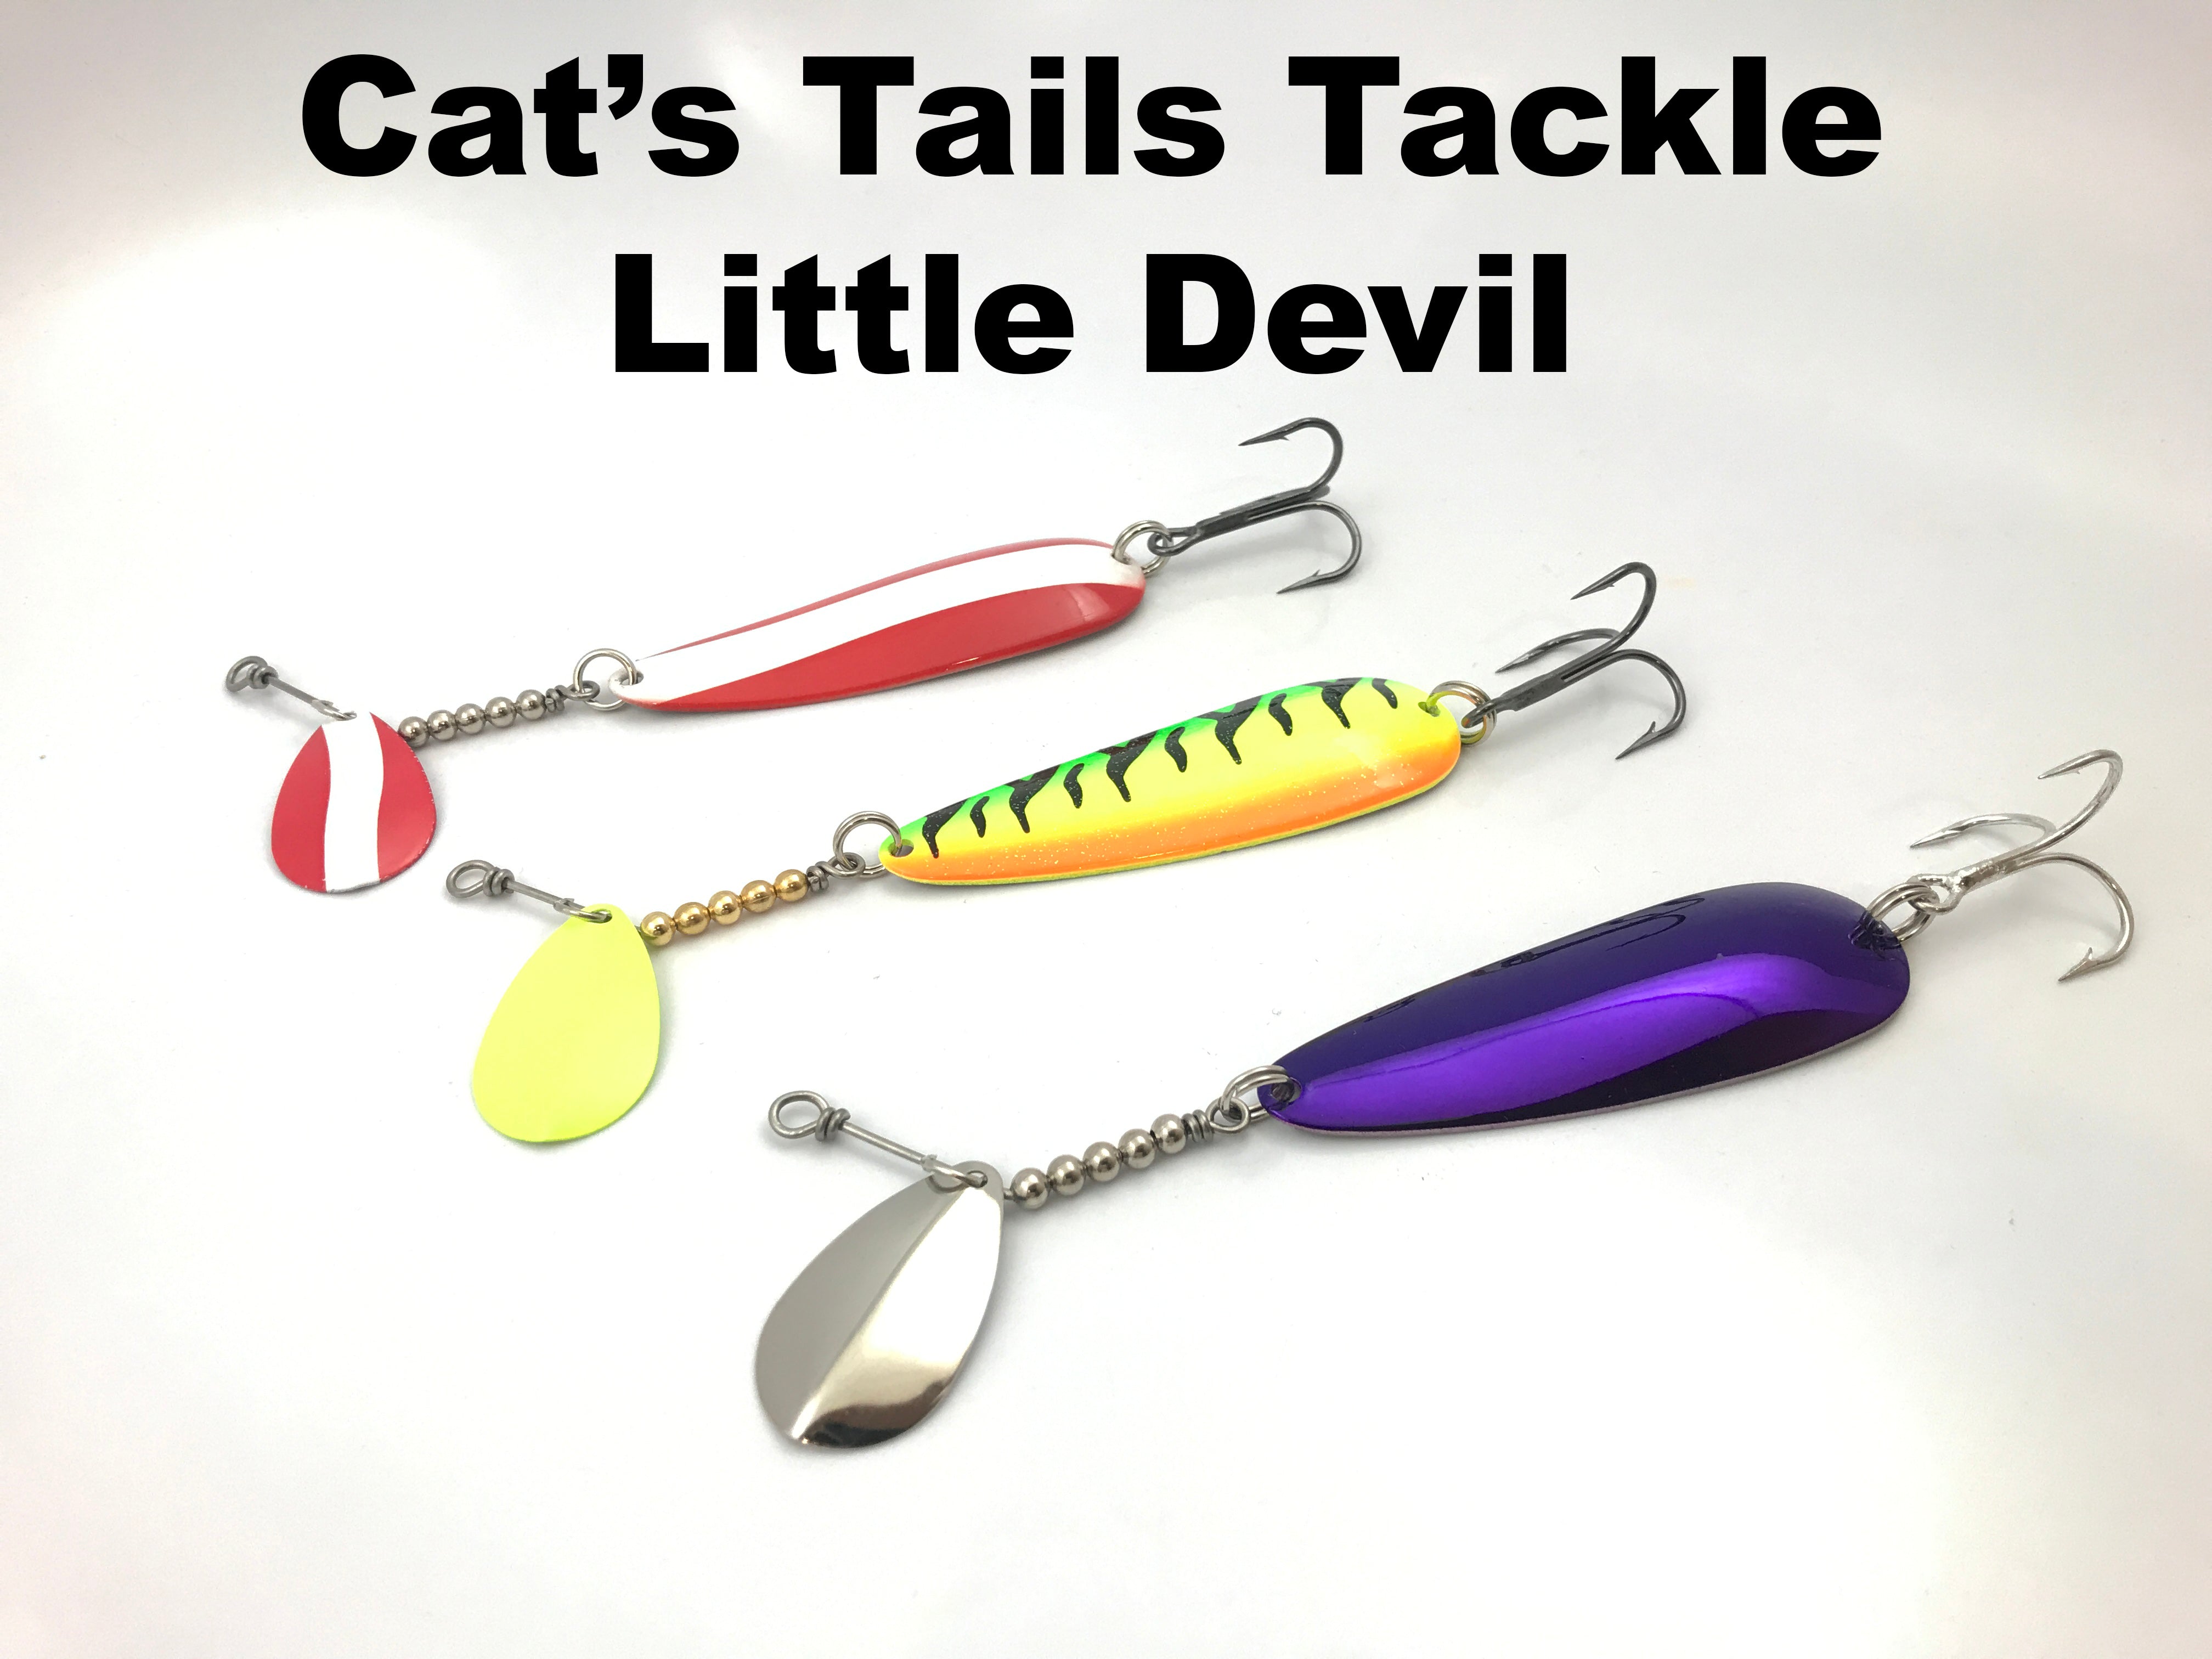 Cat's Tails Tackle Little Devil Spoon – Team Rhino Outdoors LLC